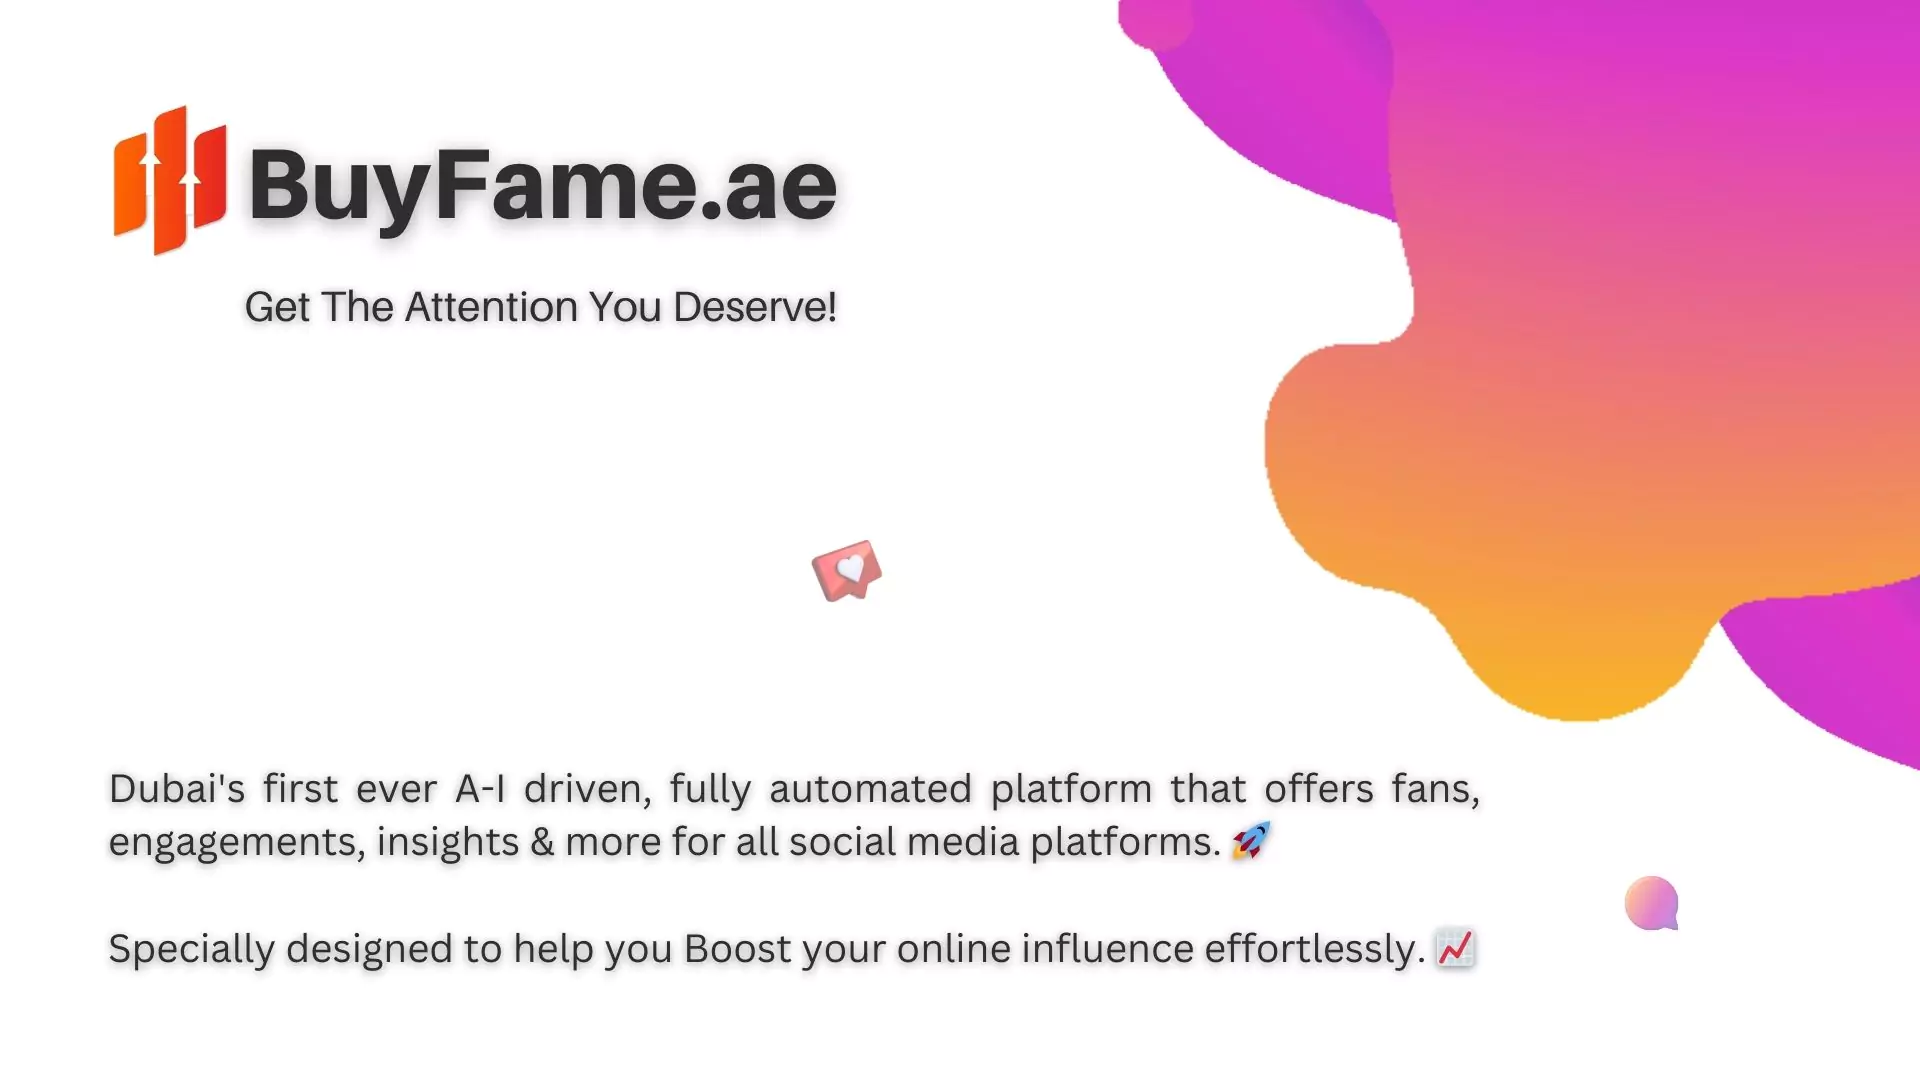 buyfame.ae - Get the attention you deserve!